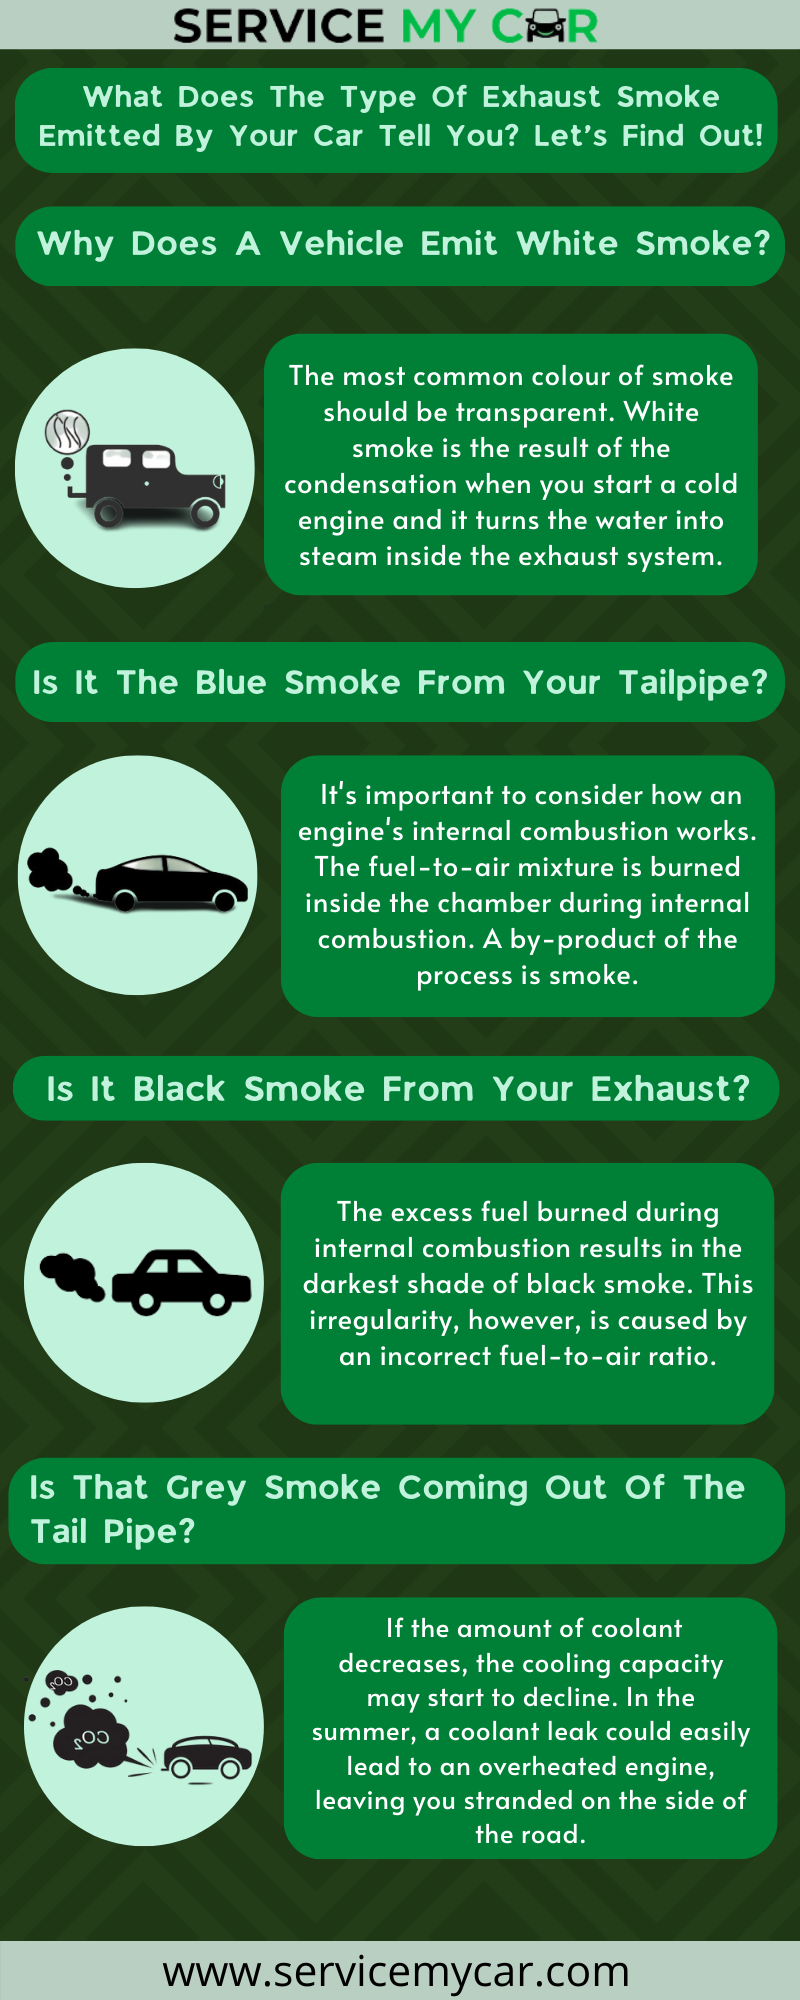 What Does The Type Of Exhaust Smoke Emitted By Your Car Tell You? Let’s Find Out!